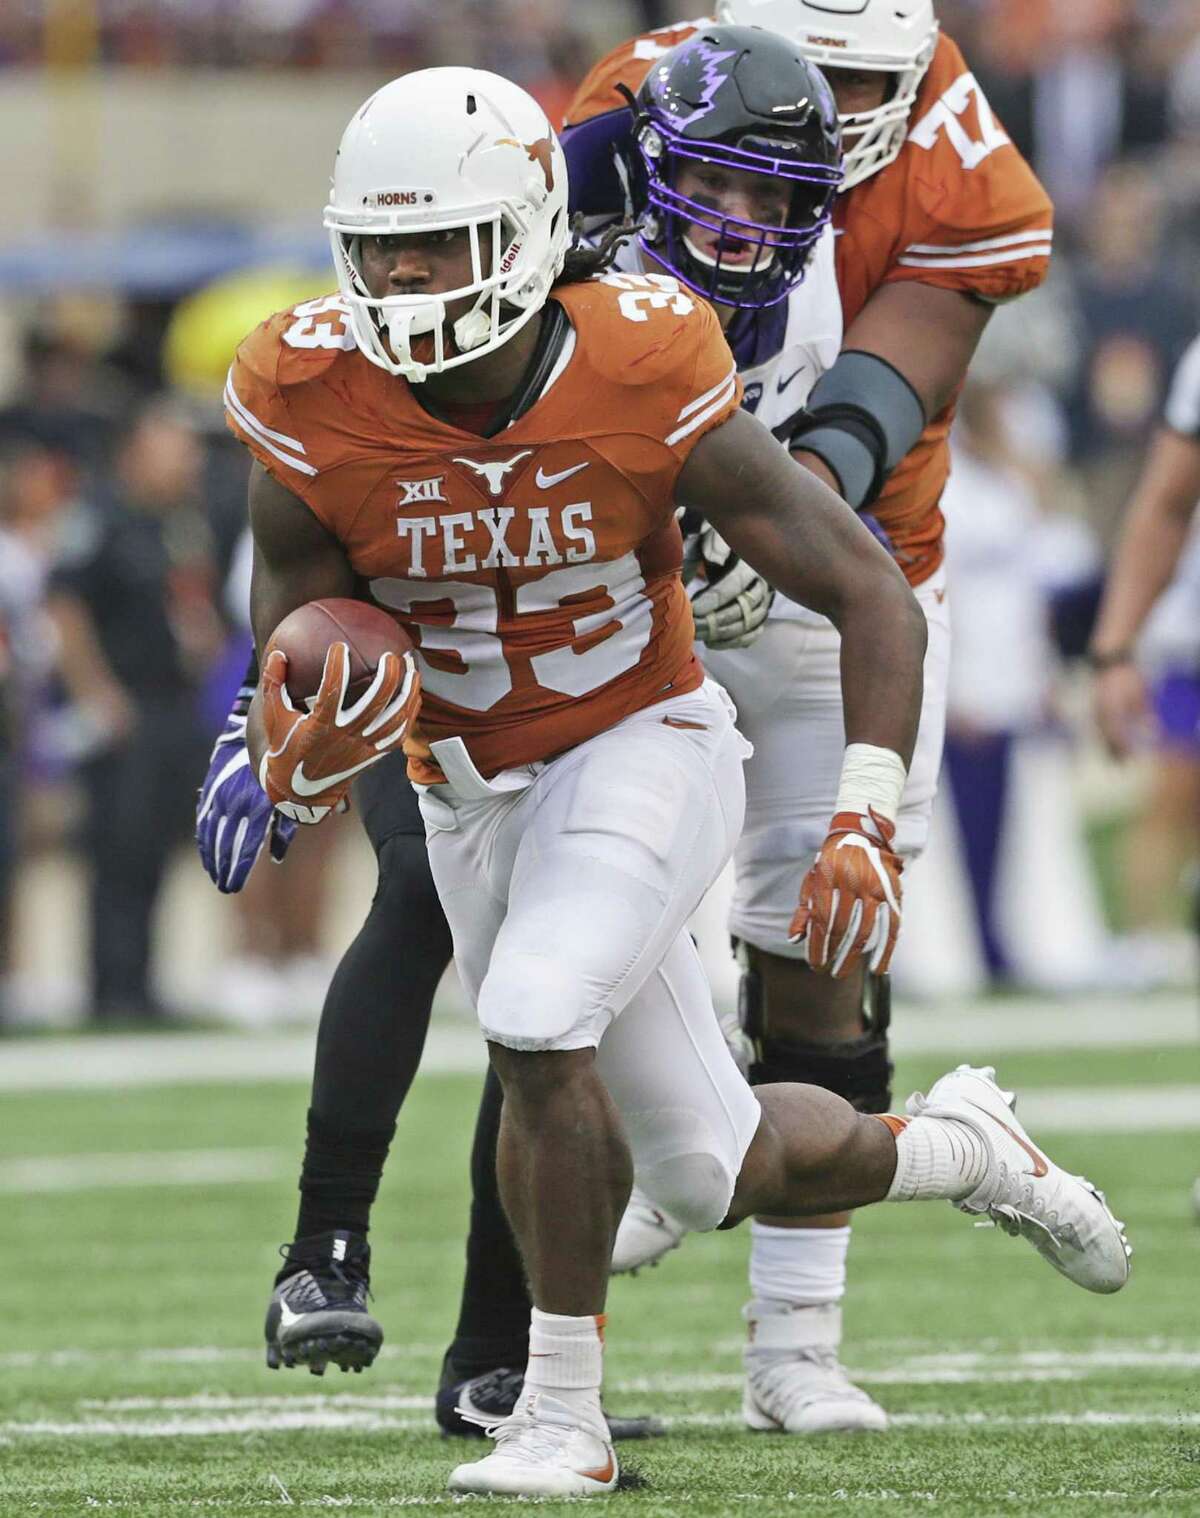 Texas’ D’Onta Foreman breaks through an opening untouched and runs for a long gain against TCU at Royal-Memorial Stadium in Austin on Nov. 25, 2016.